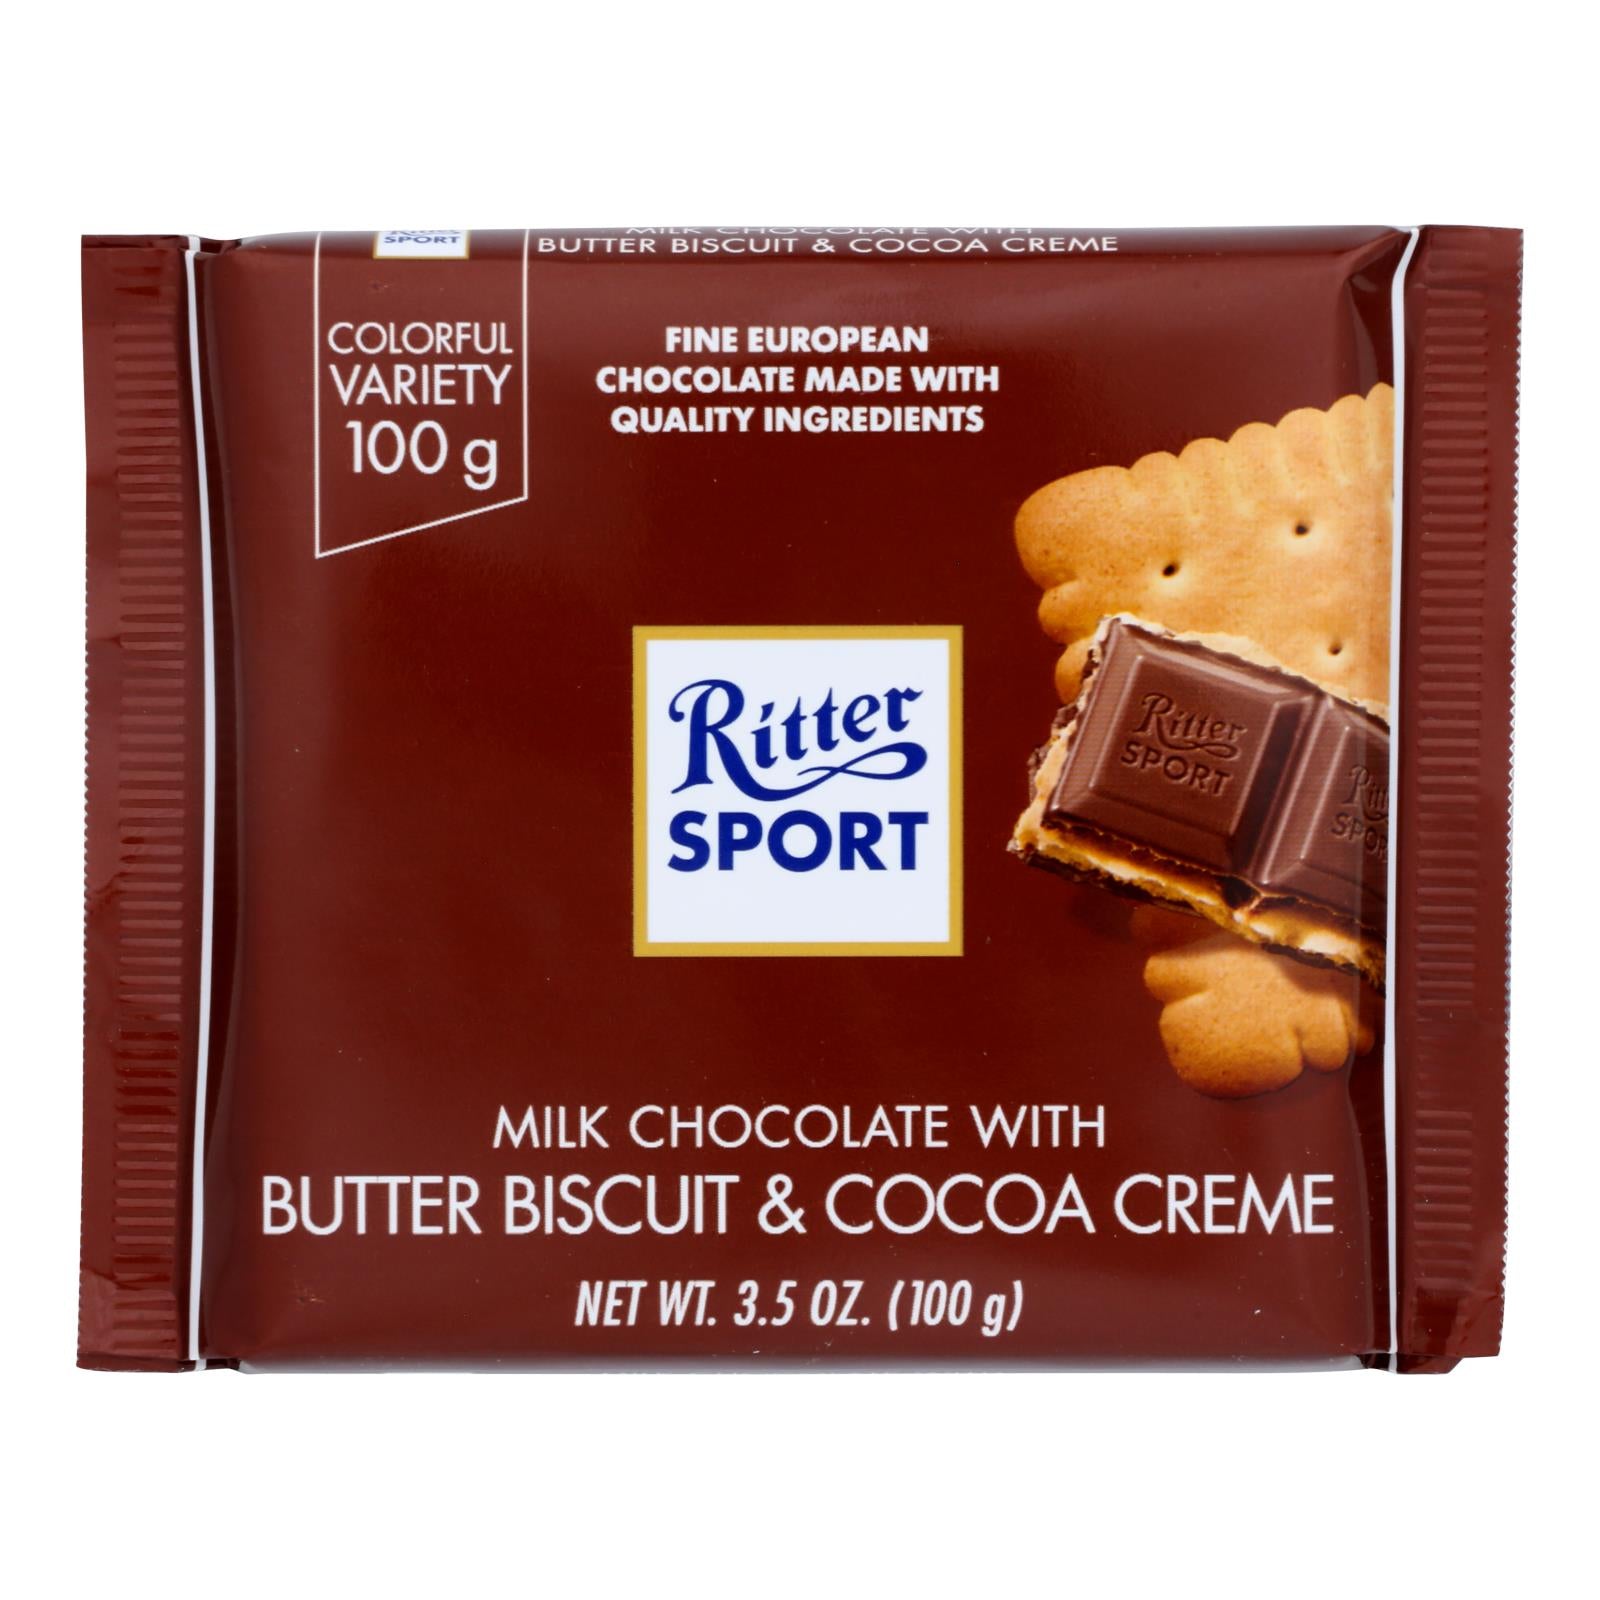 Ritter Sport Chocolate Bar - Milk Chocolate - Butter Biscuit - 3.5 oz Bars - Case of 11